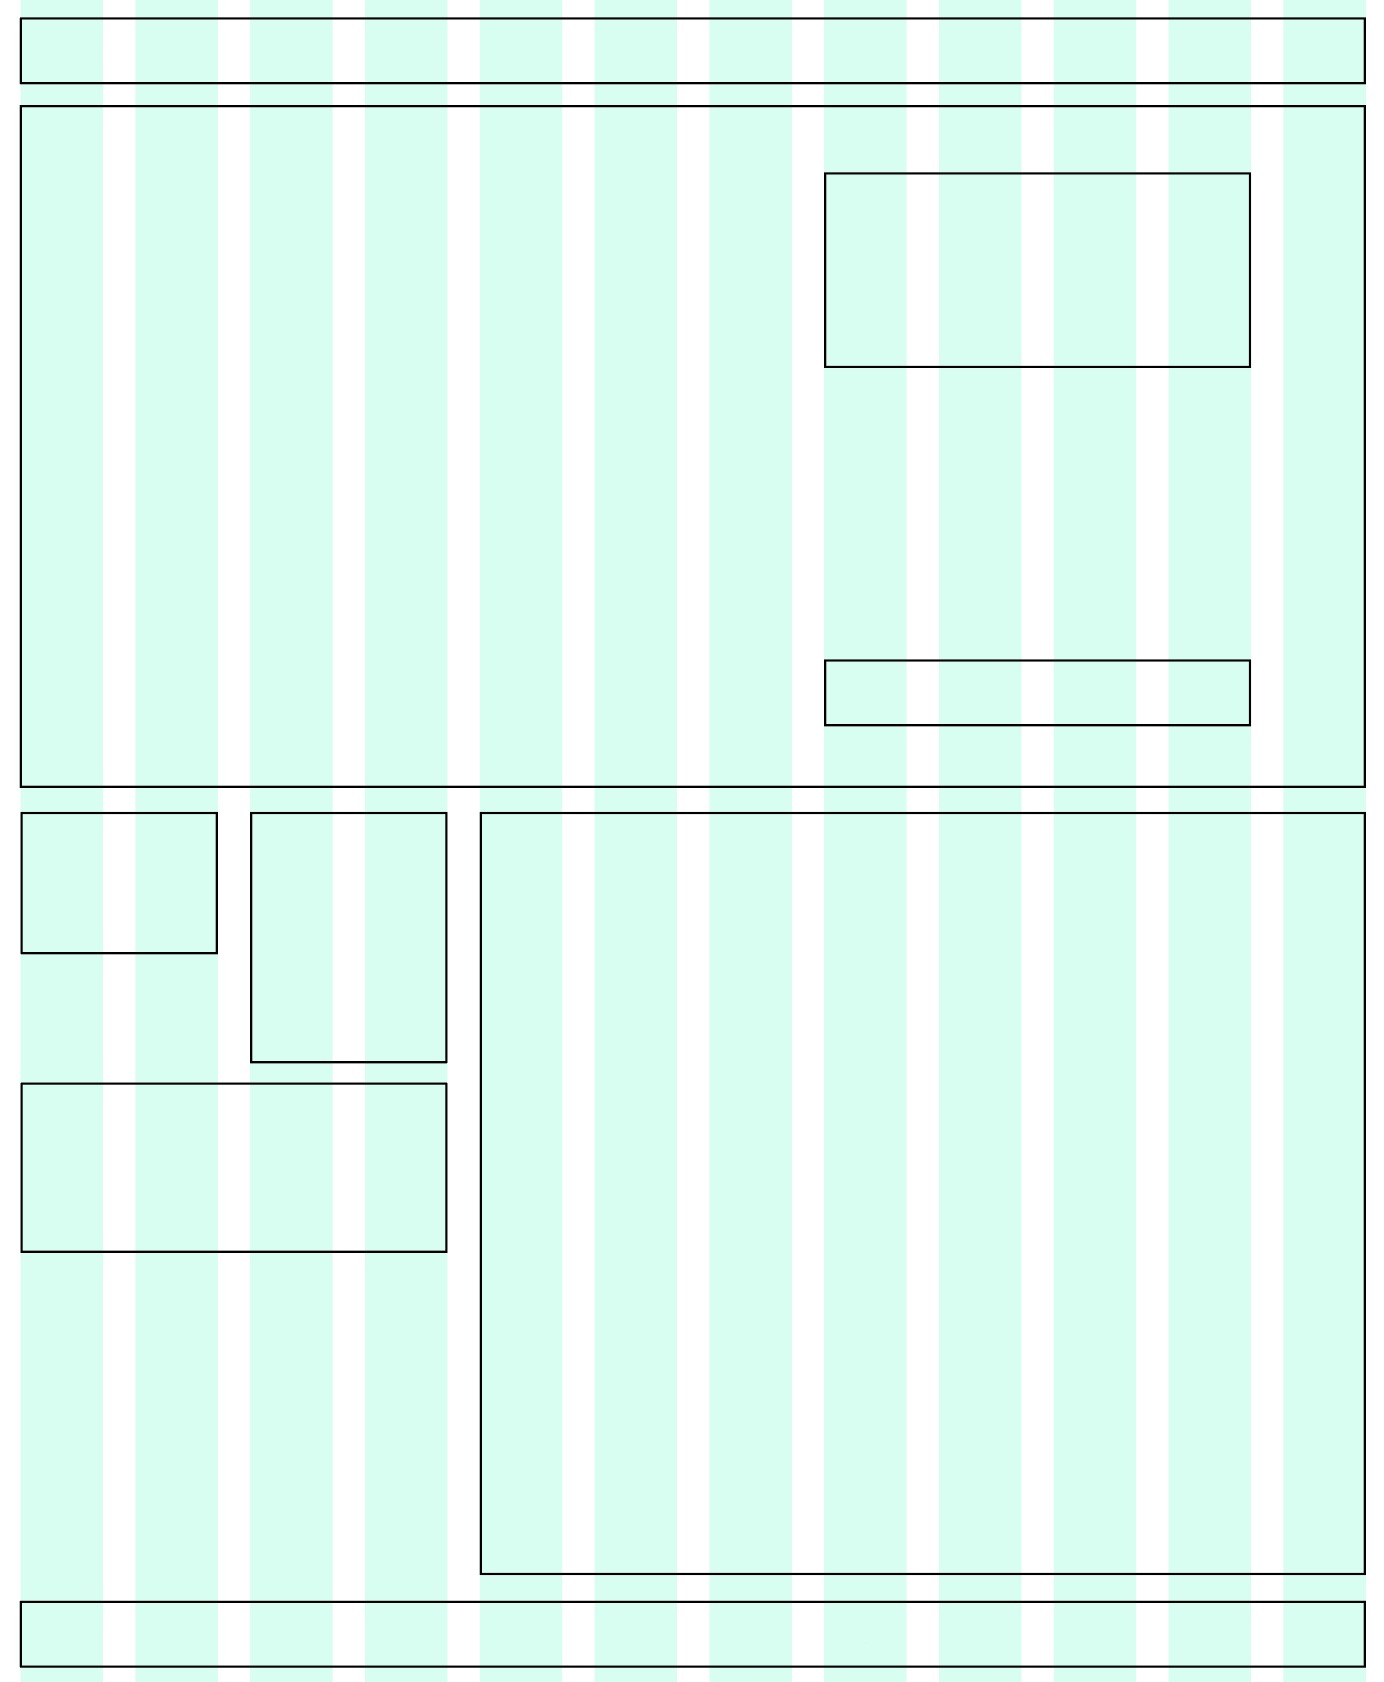 A wide-screen wireframe with different sizes